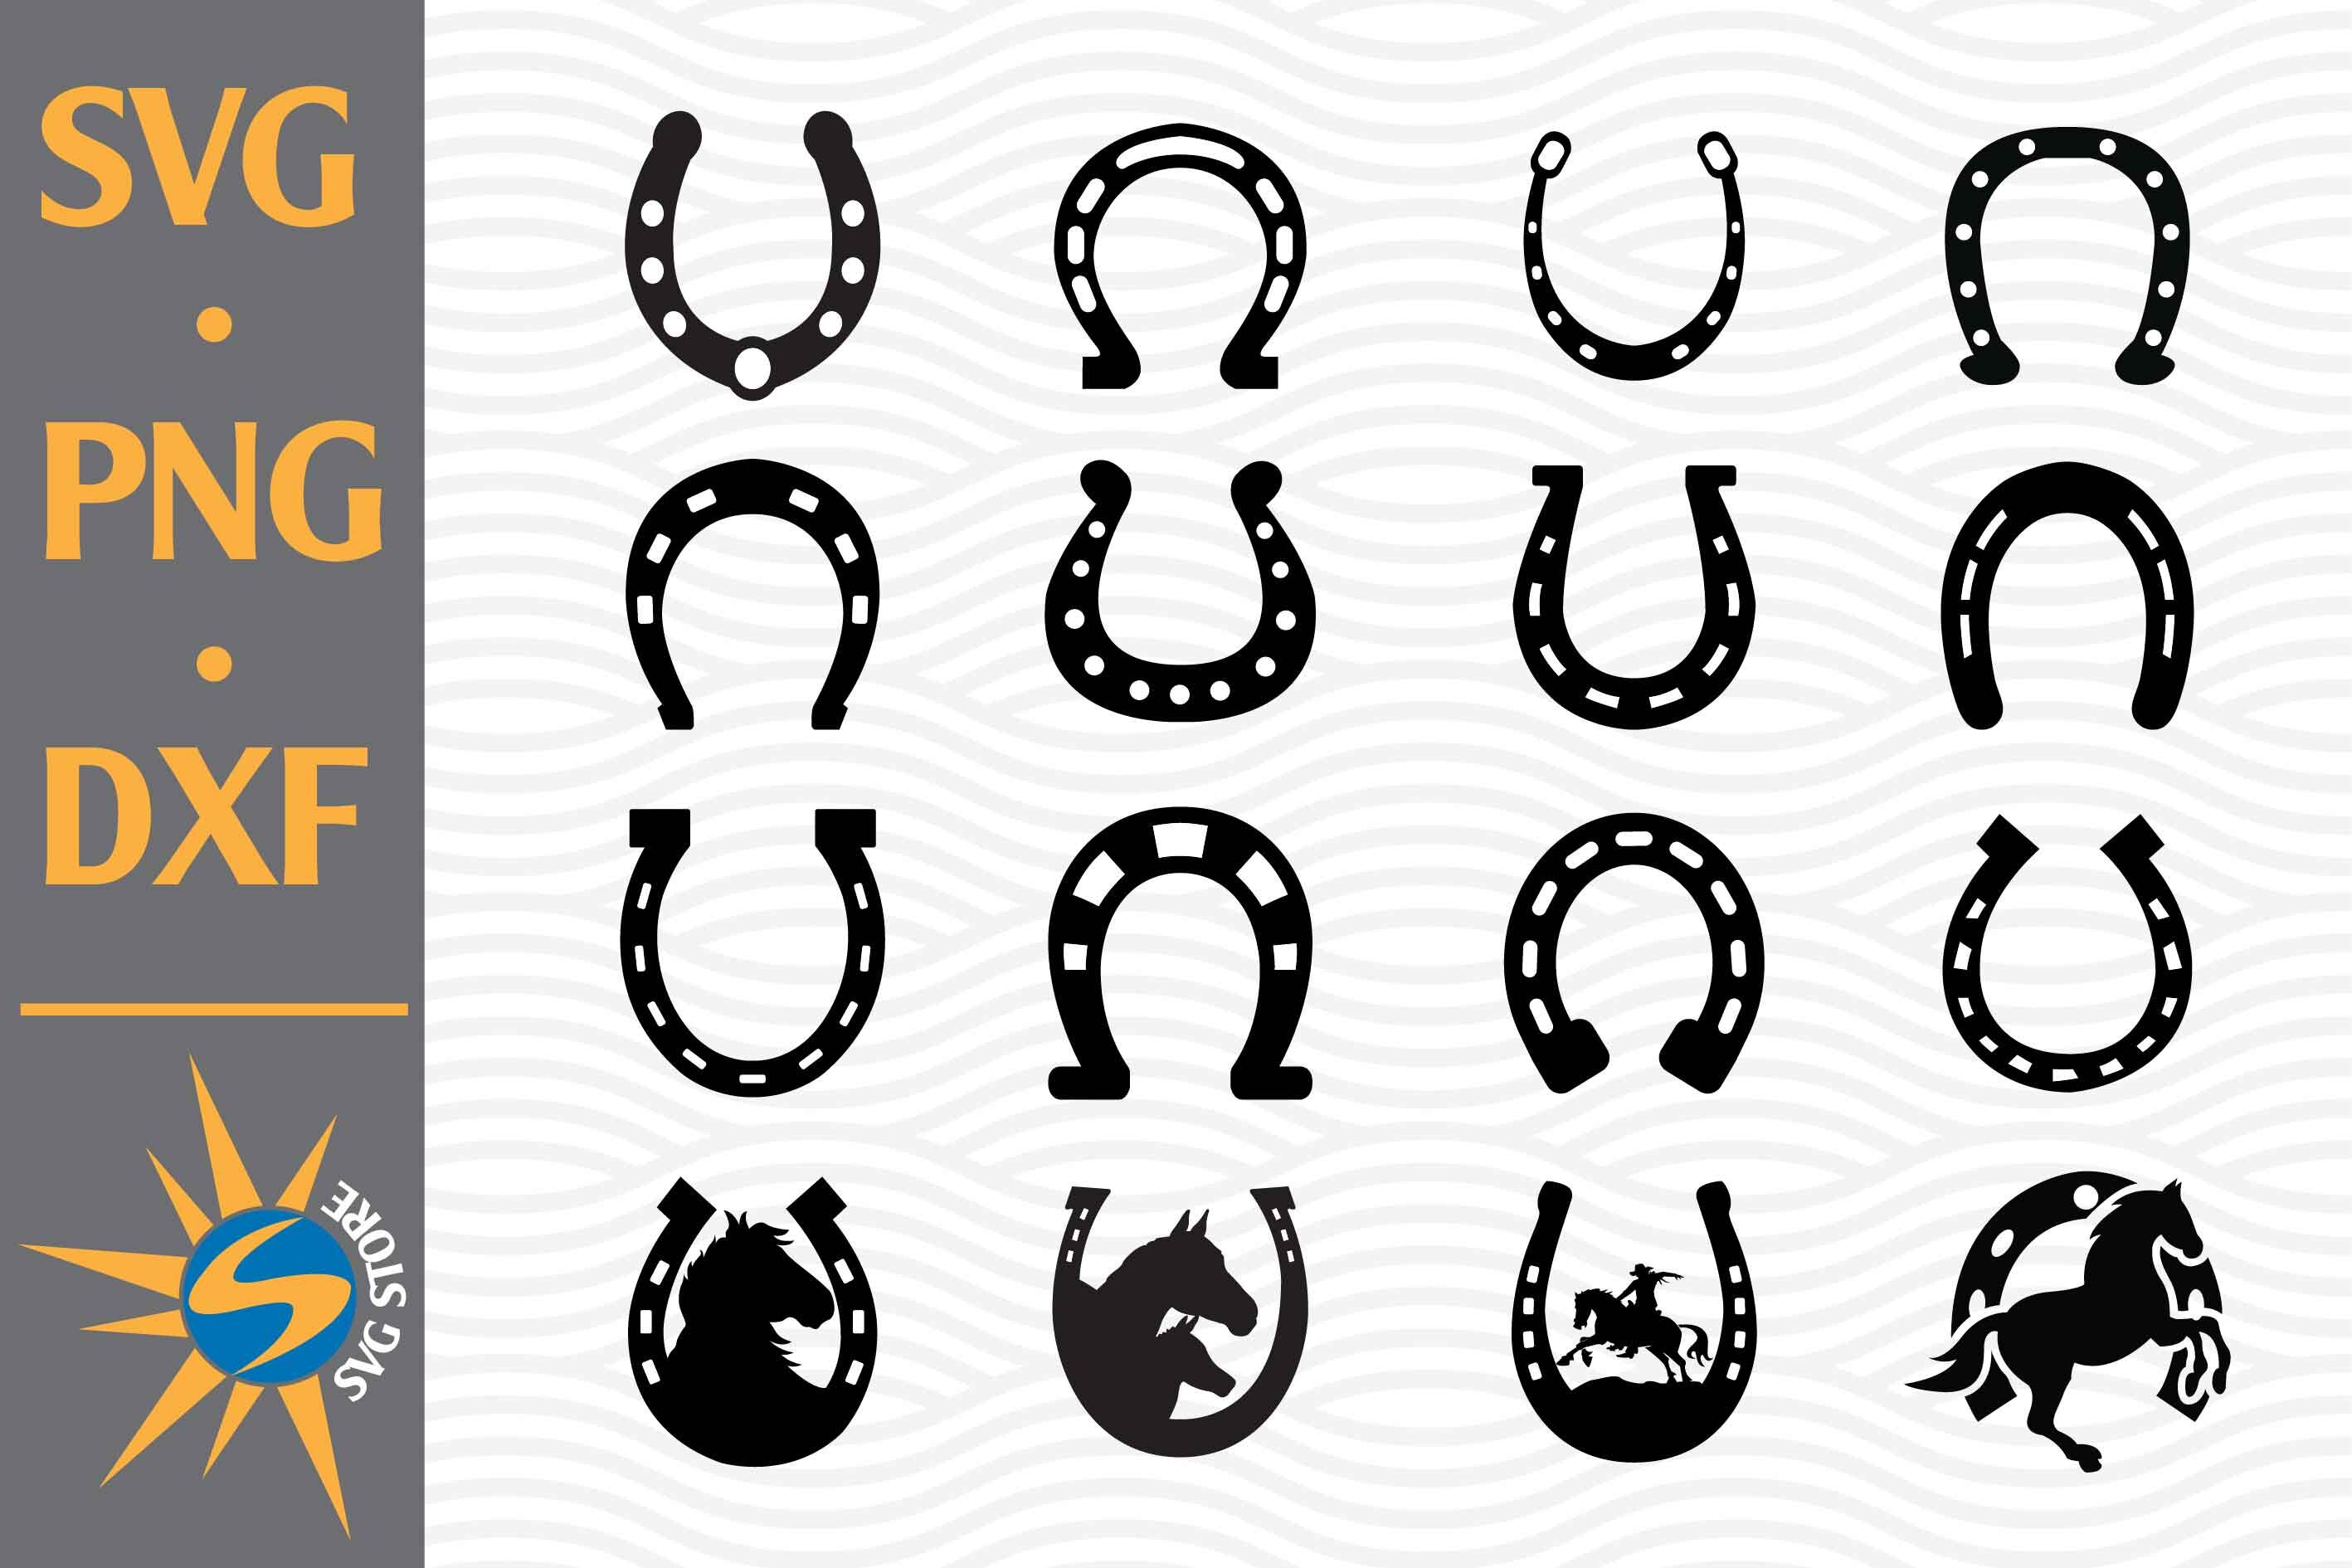 Horse Shoe SVG, PNG, DXF Digital Files Include By SVGStoreShop